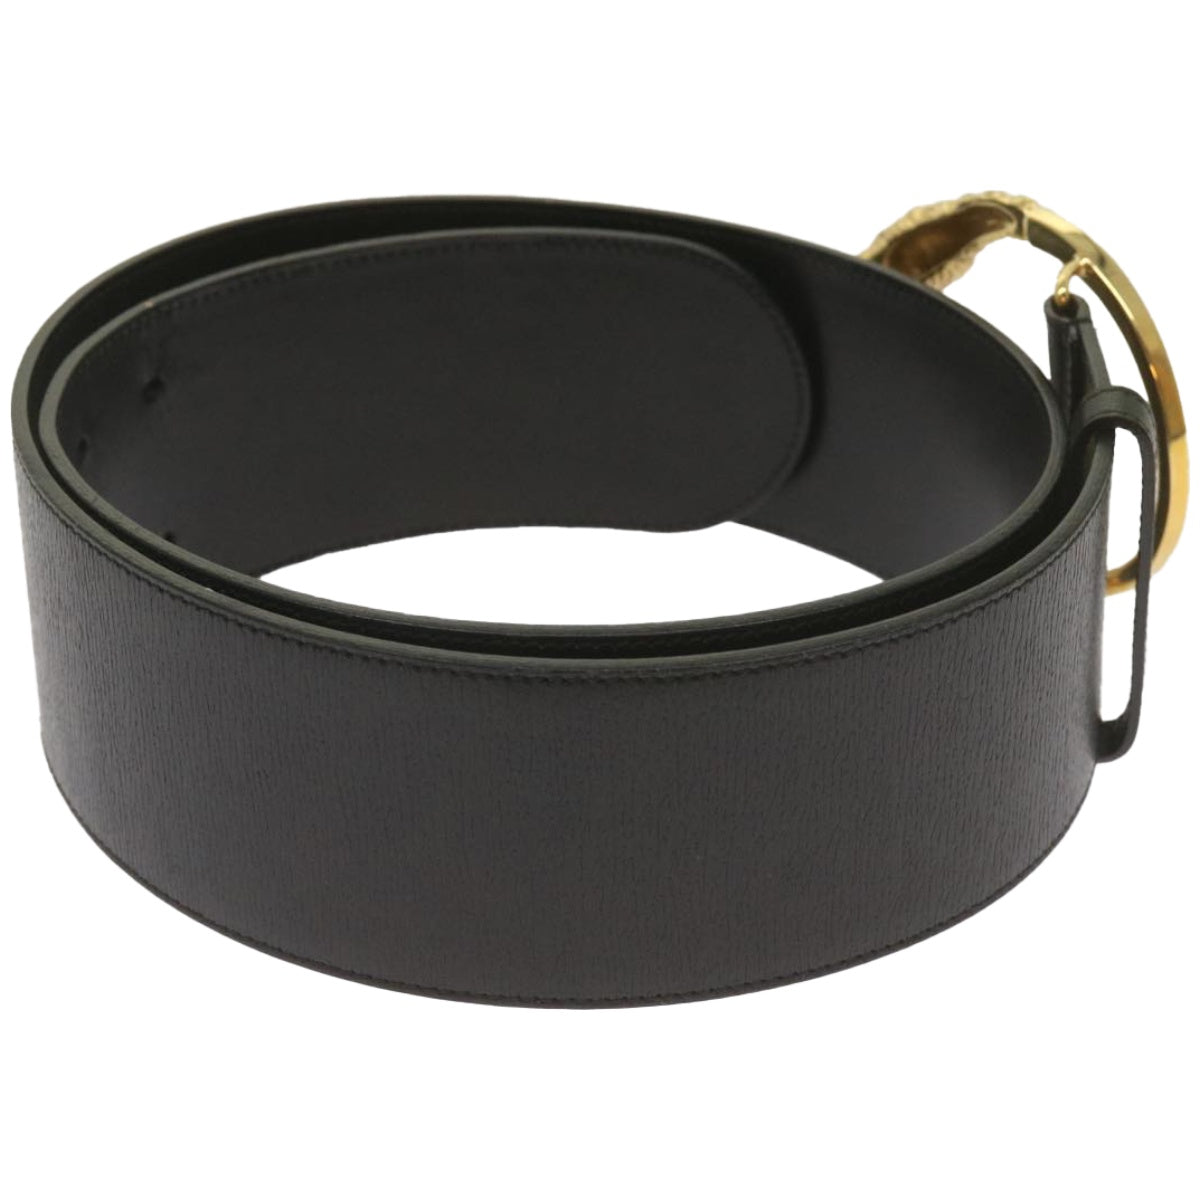 GUCCI Belt Leather 37"" Black Auth bs12276 - 0